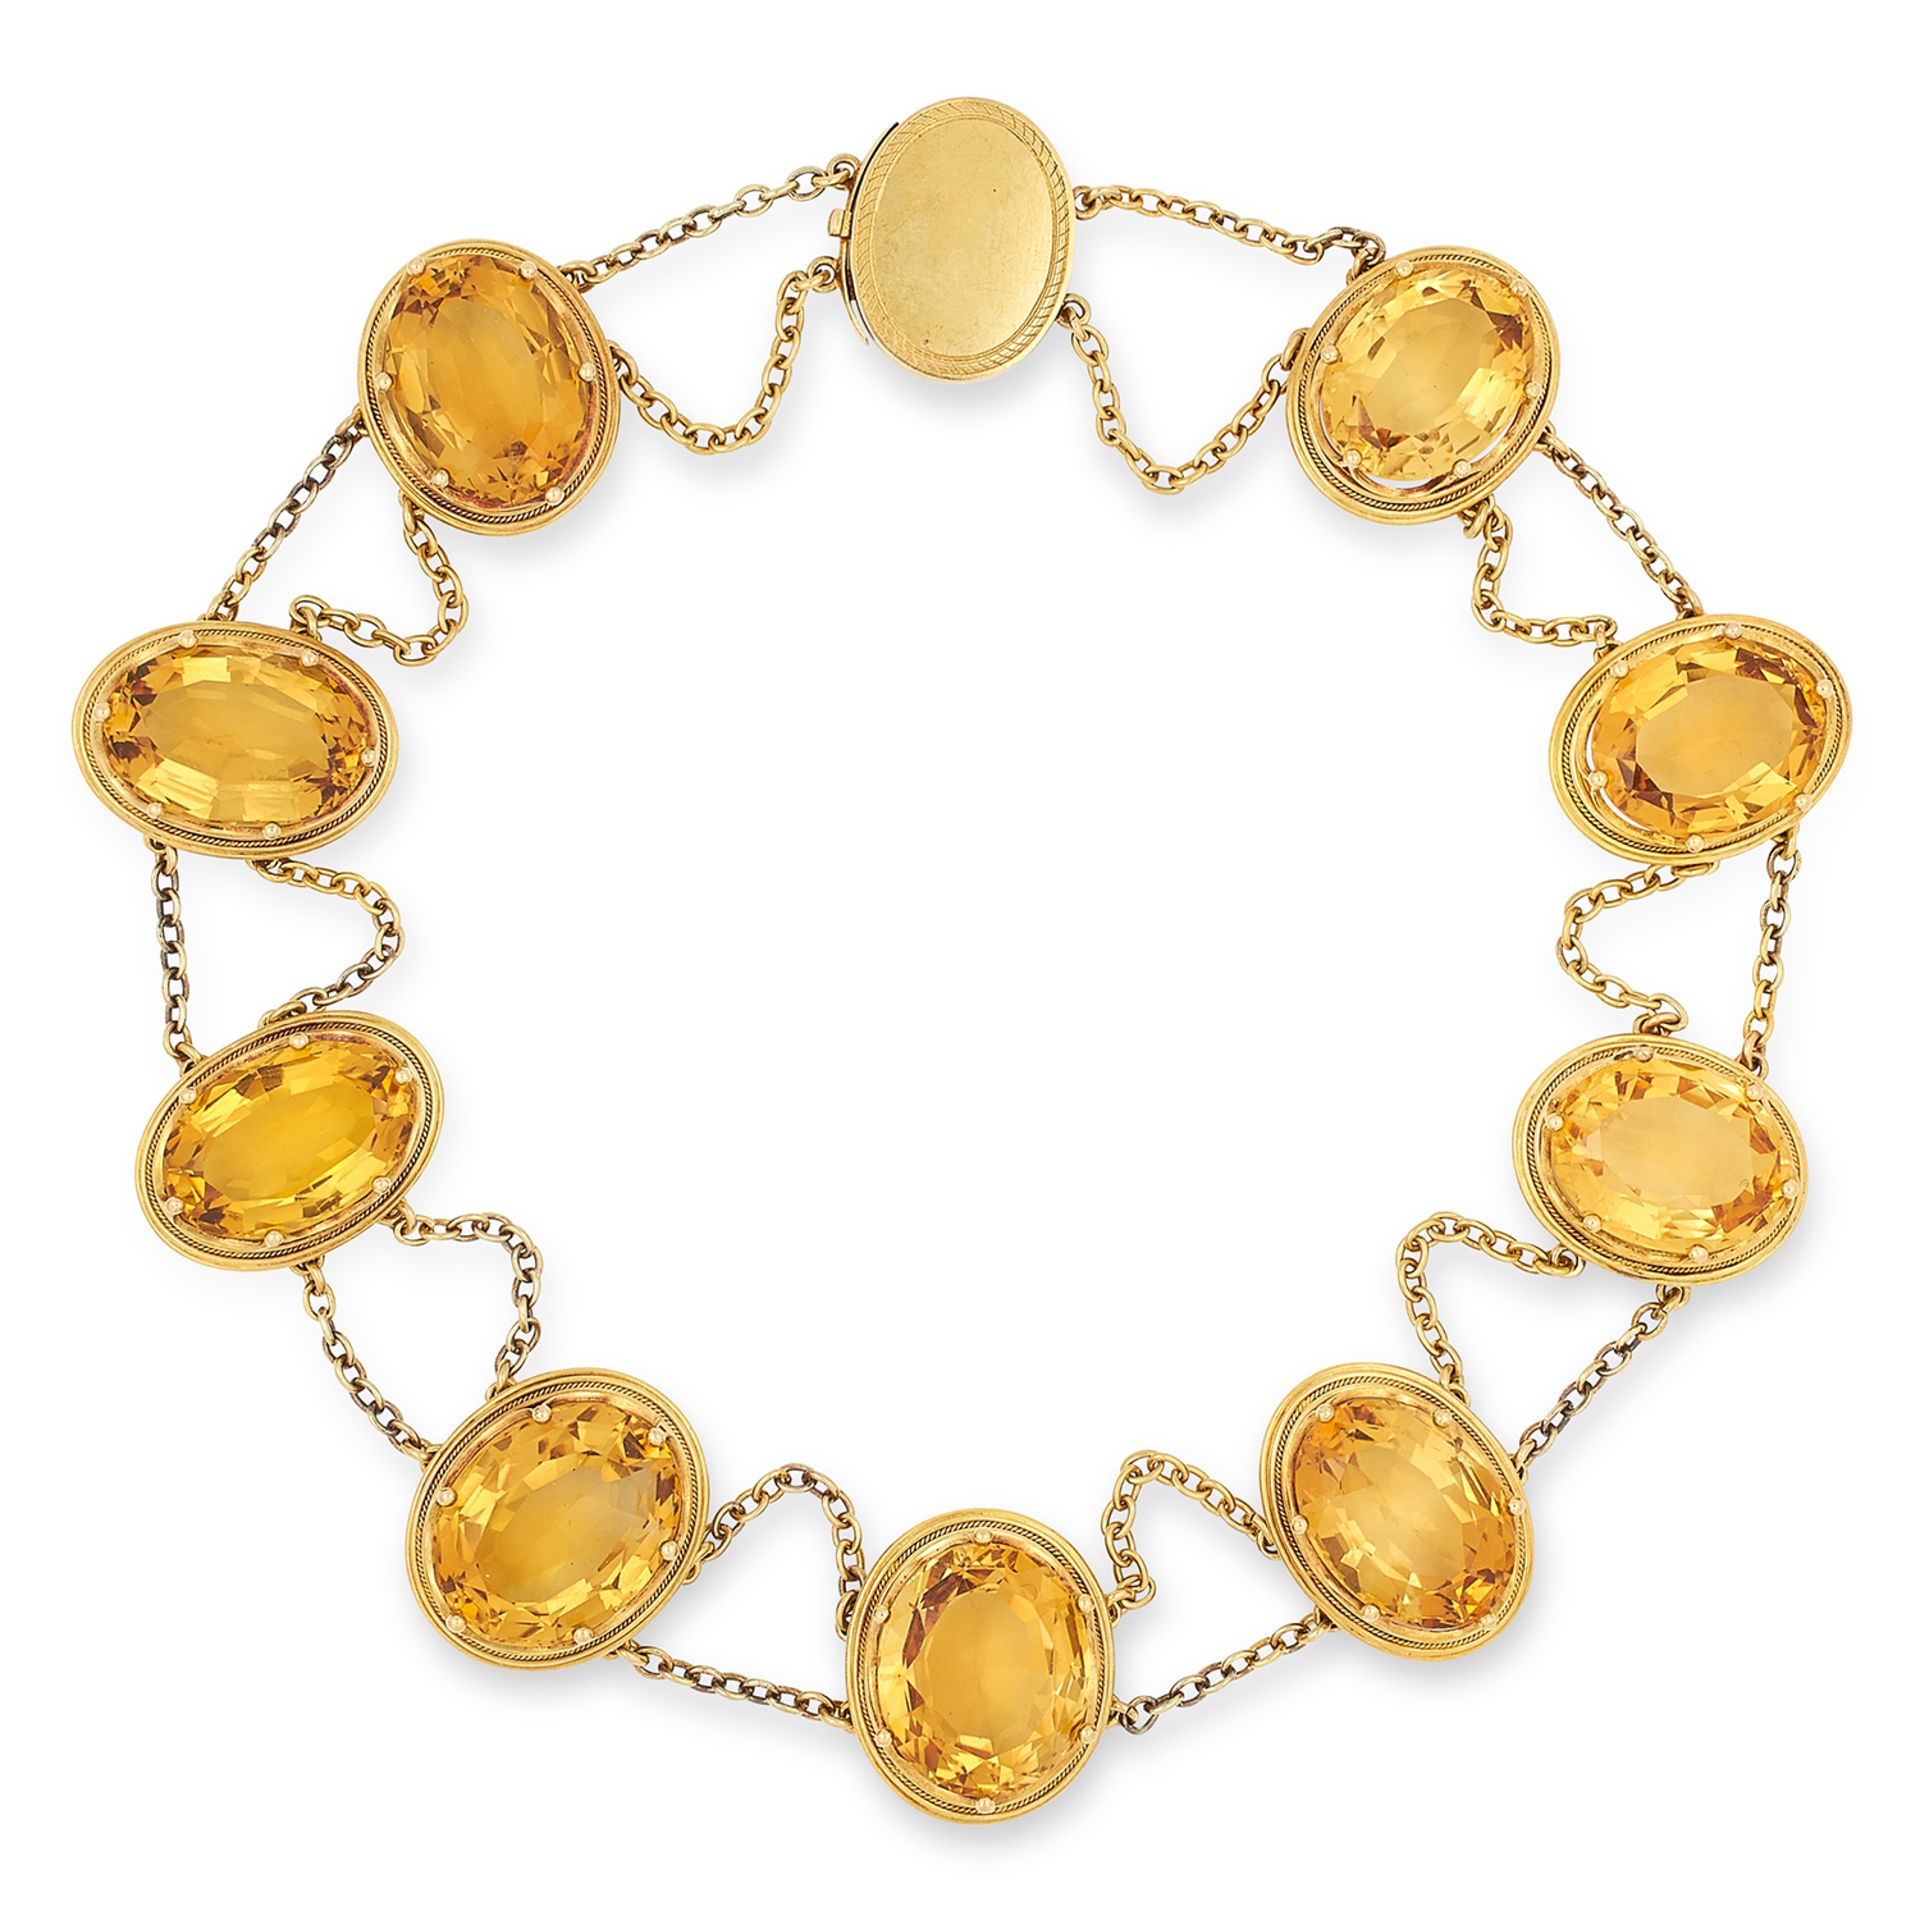 ANTIQUE CITRINE NECKLACE set with nine oval cut citrines suspending belcher link chain swags, 37.